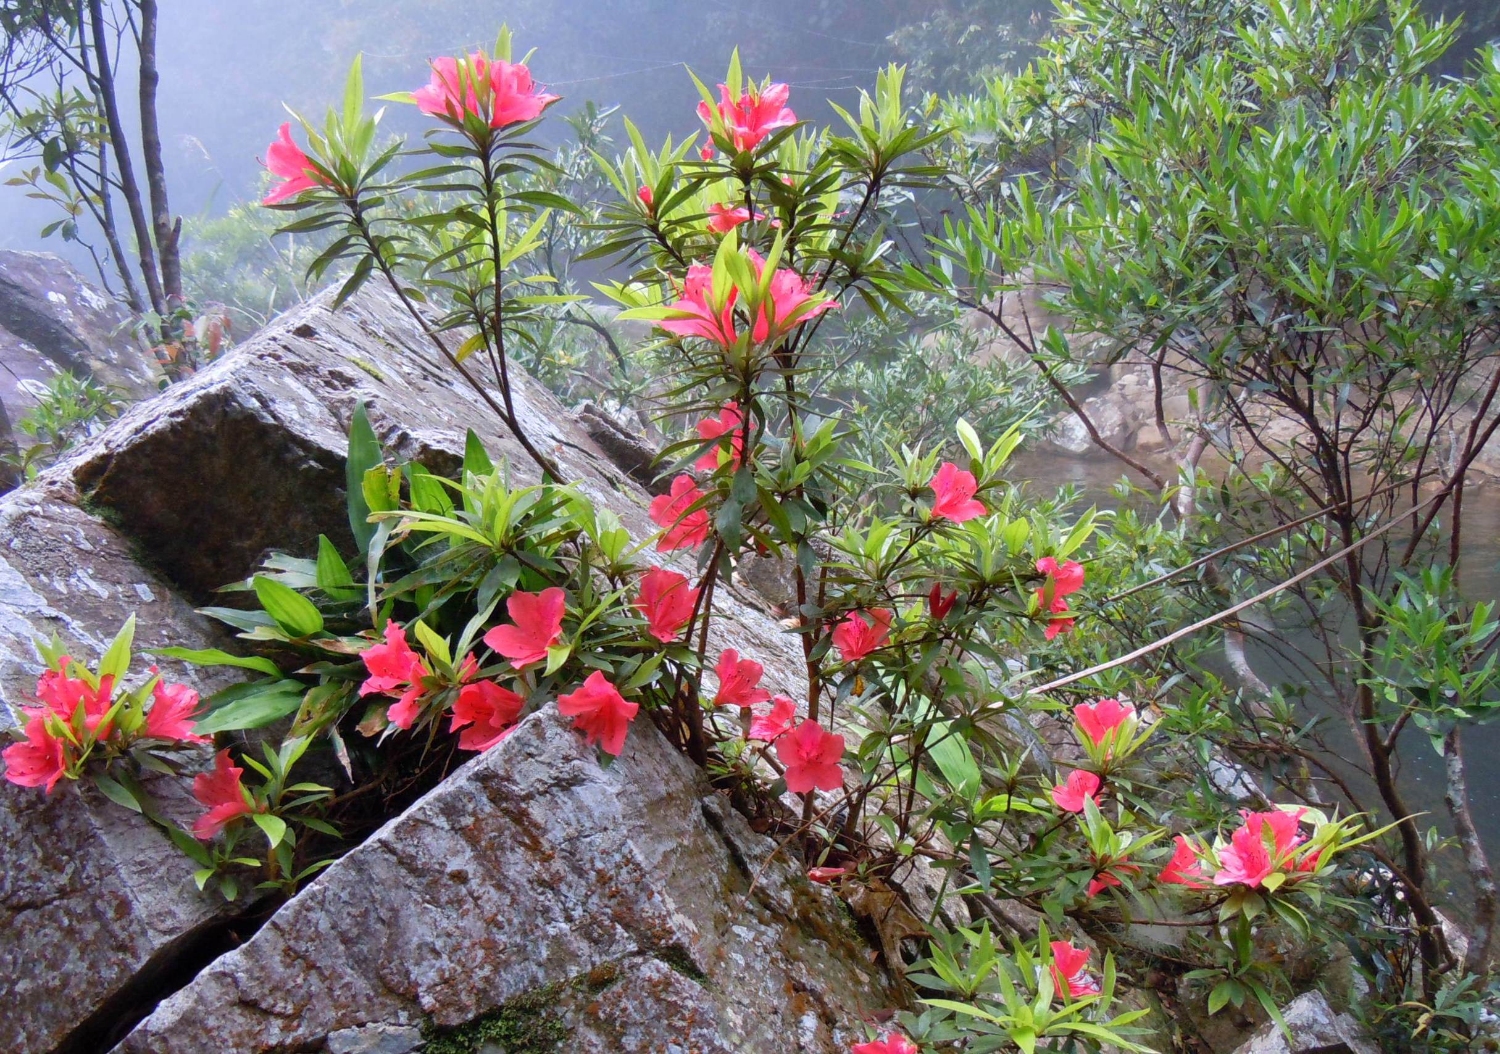 Watching top 7 most beautiful flowers in Sapa